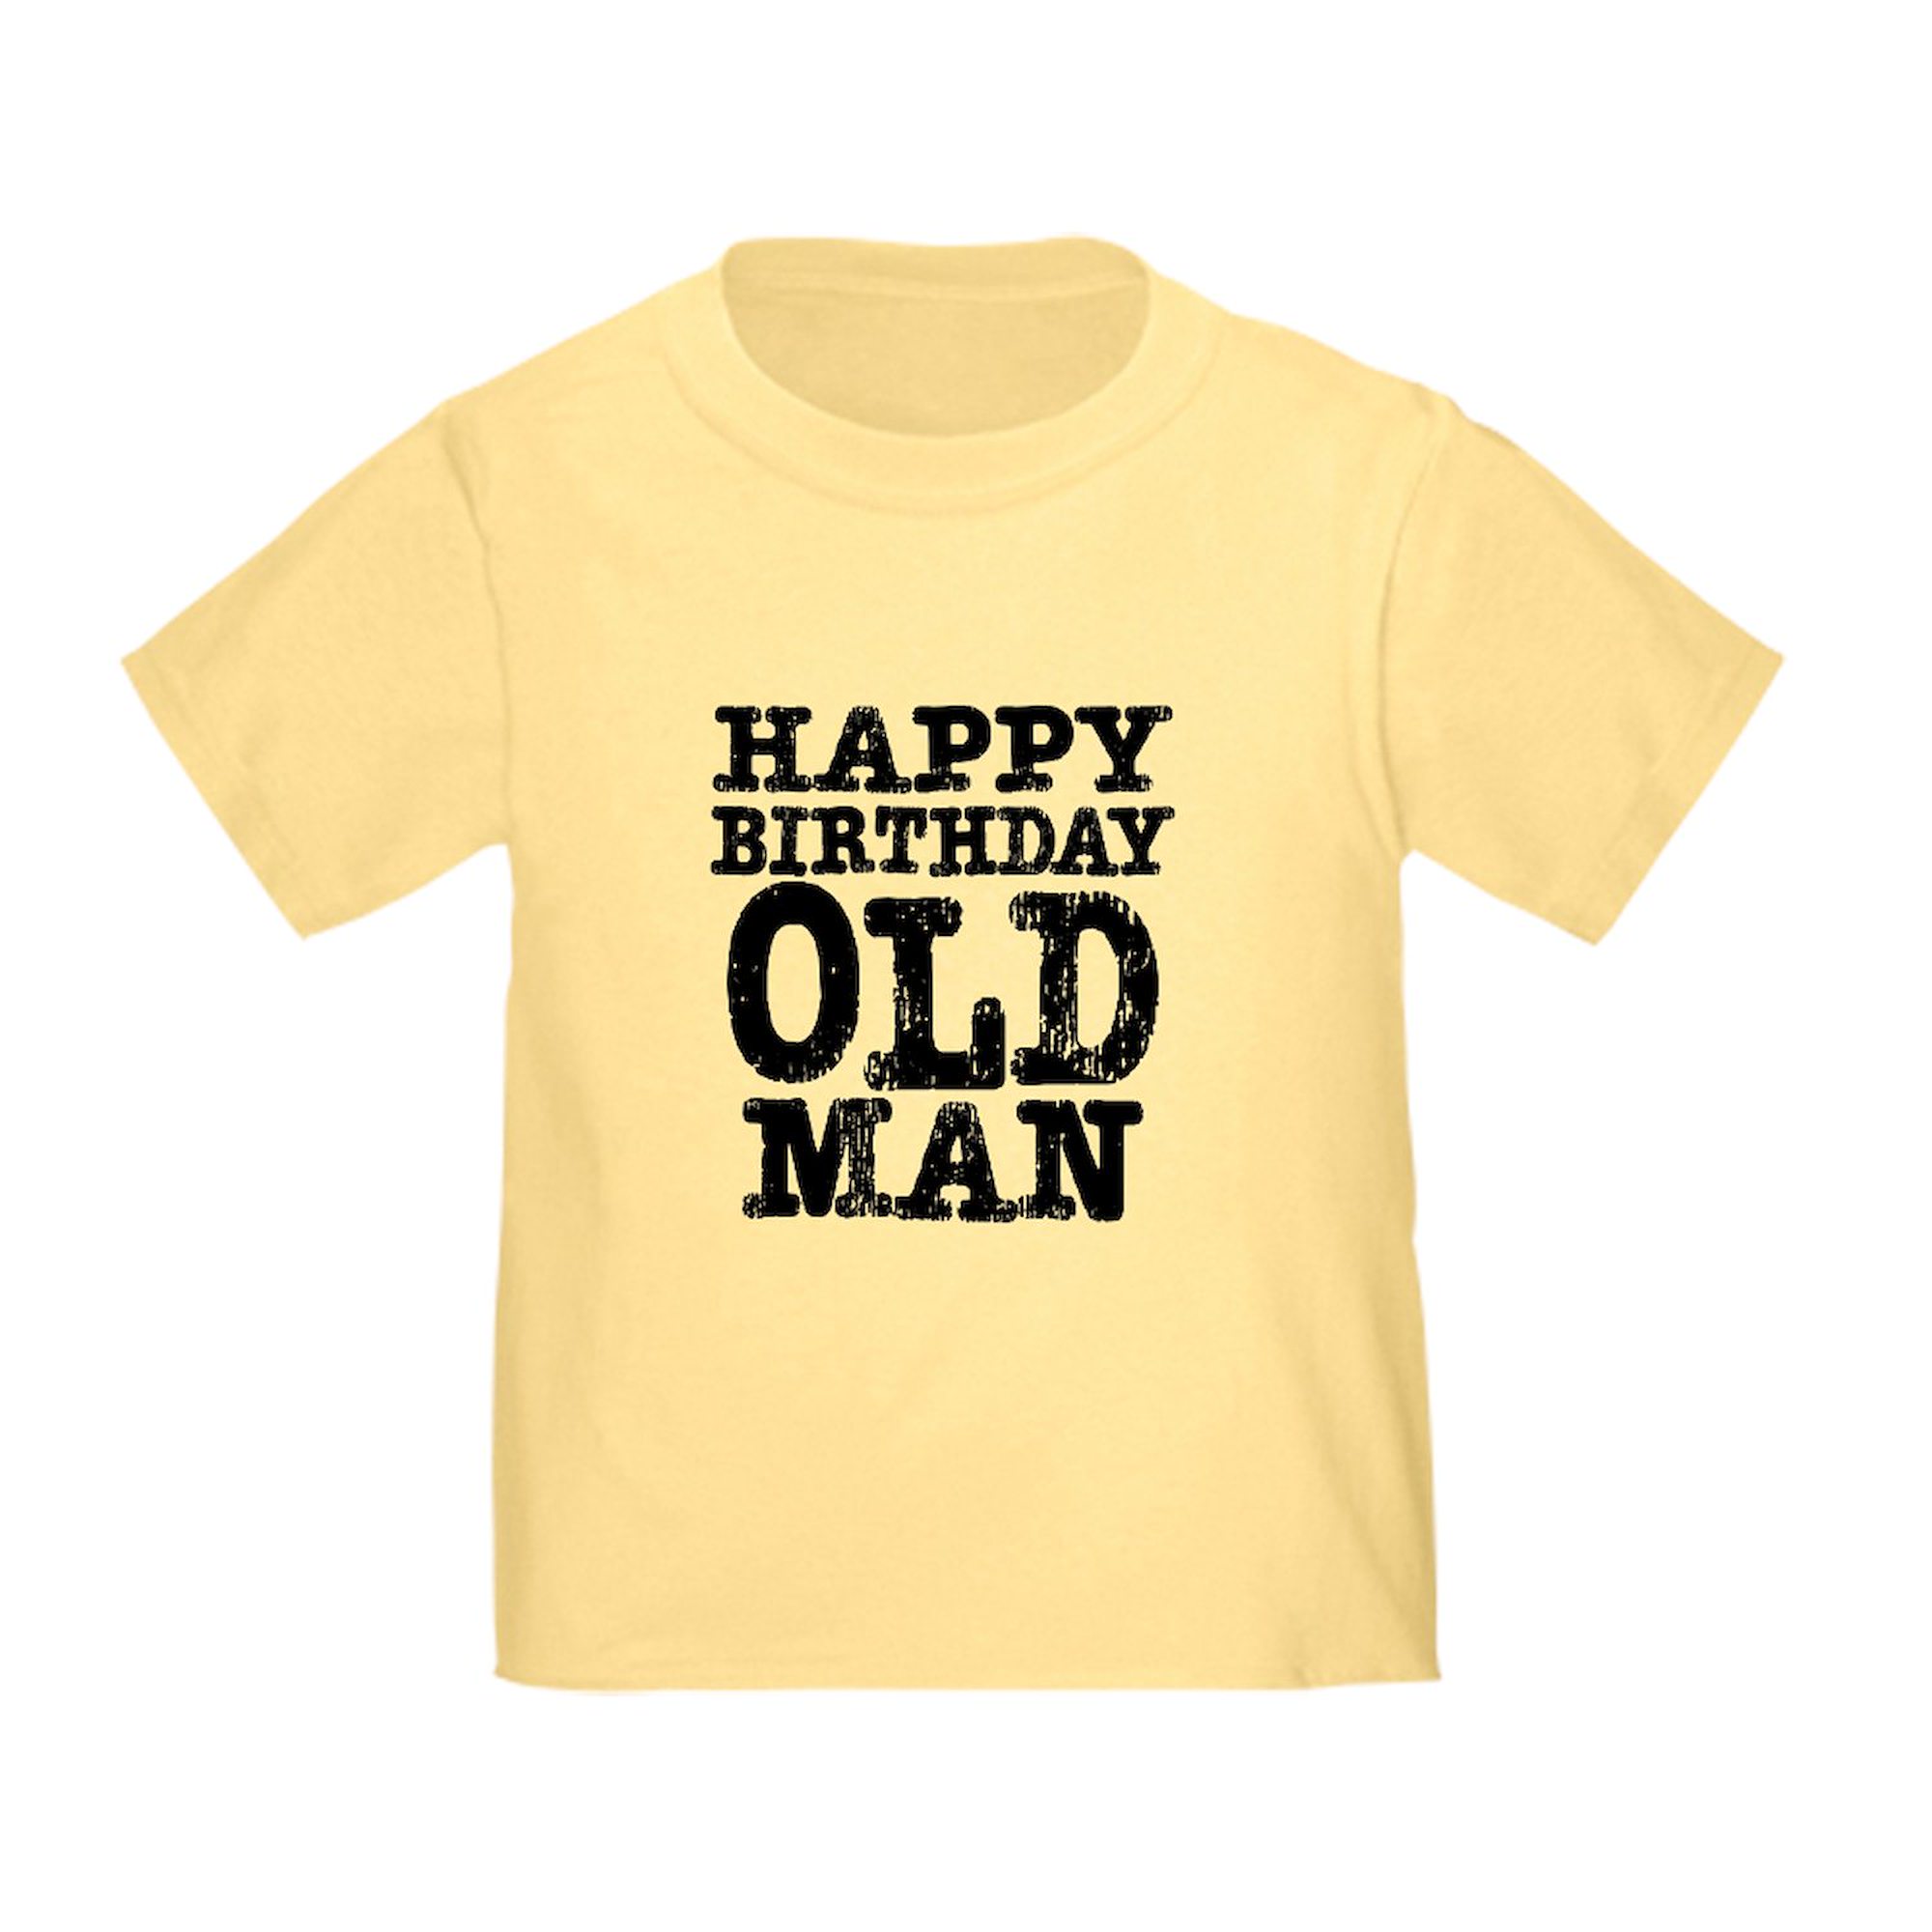 CafePress - Happy Birthday Old Man Toddler T Shirt - Cute Toddler T-Shirt, 100% Cotton - image 1 of 4